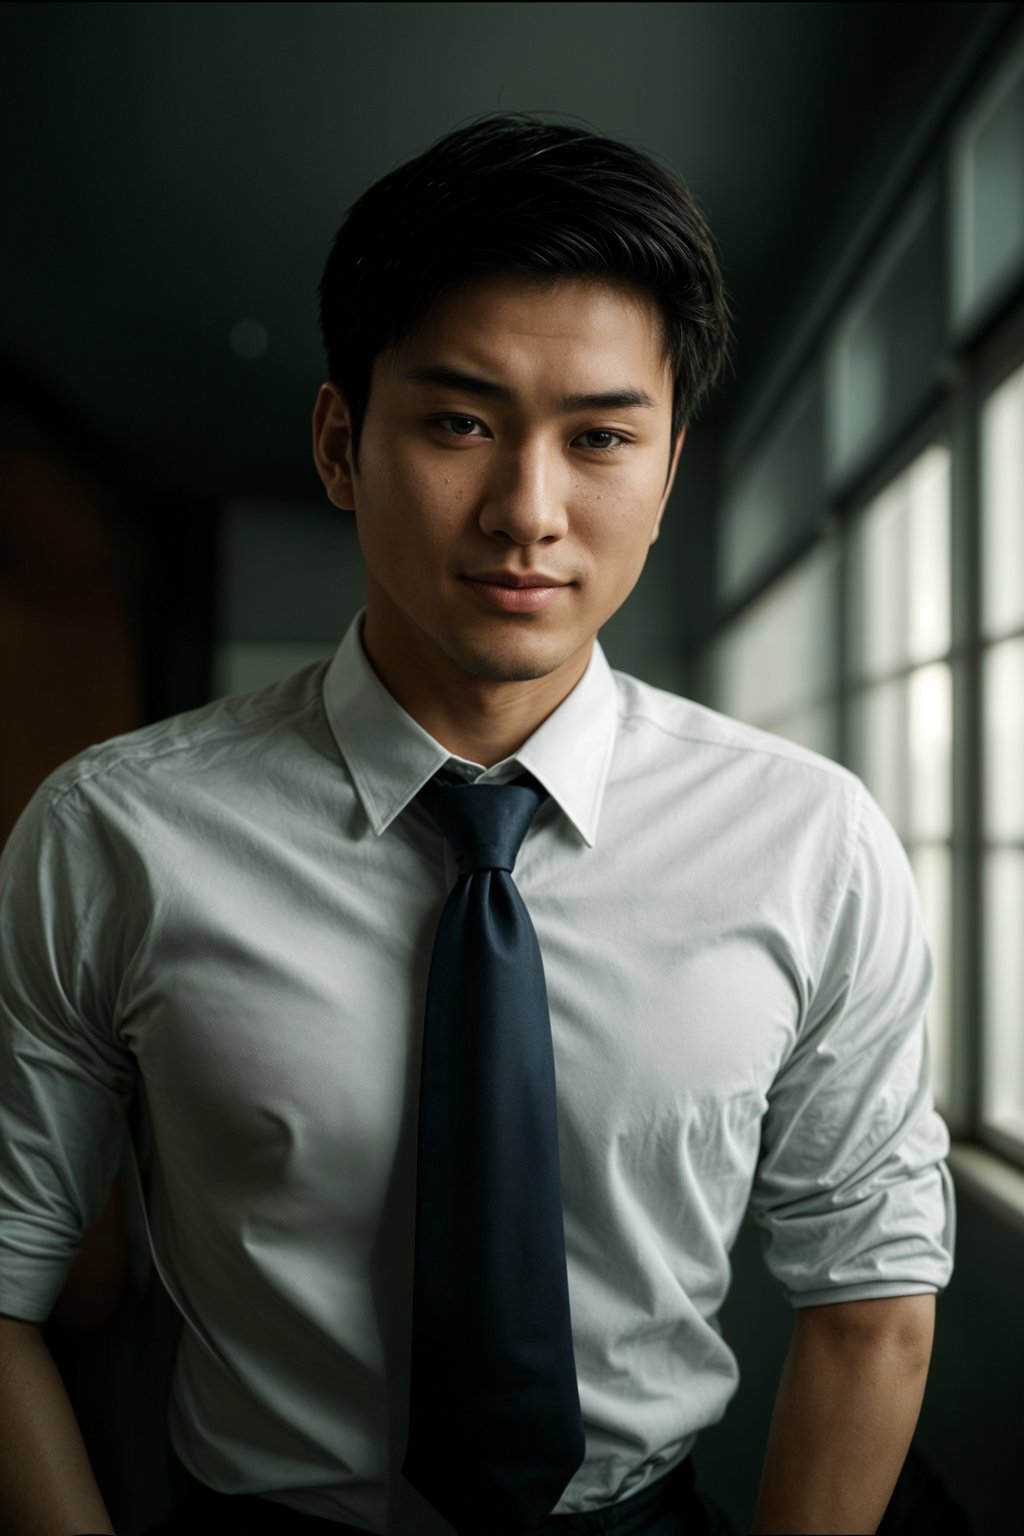 man with a seductive smile, donned in a  classy tie, under warm indoor lighting